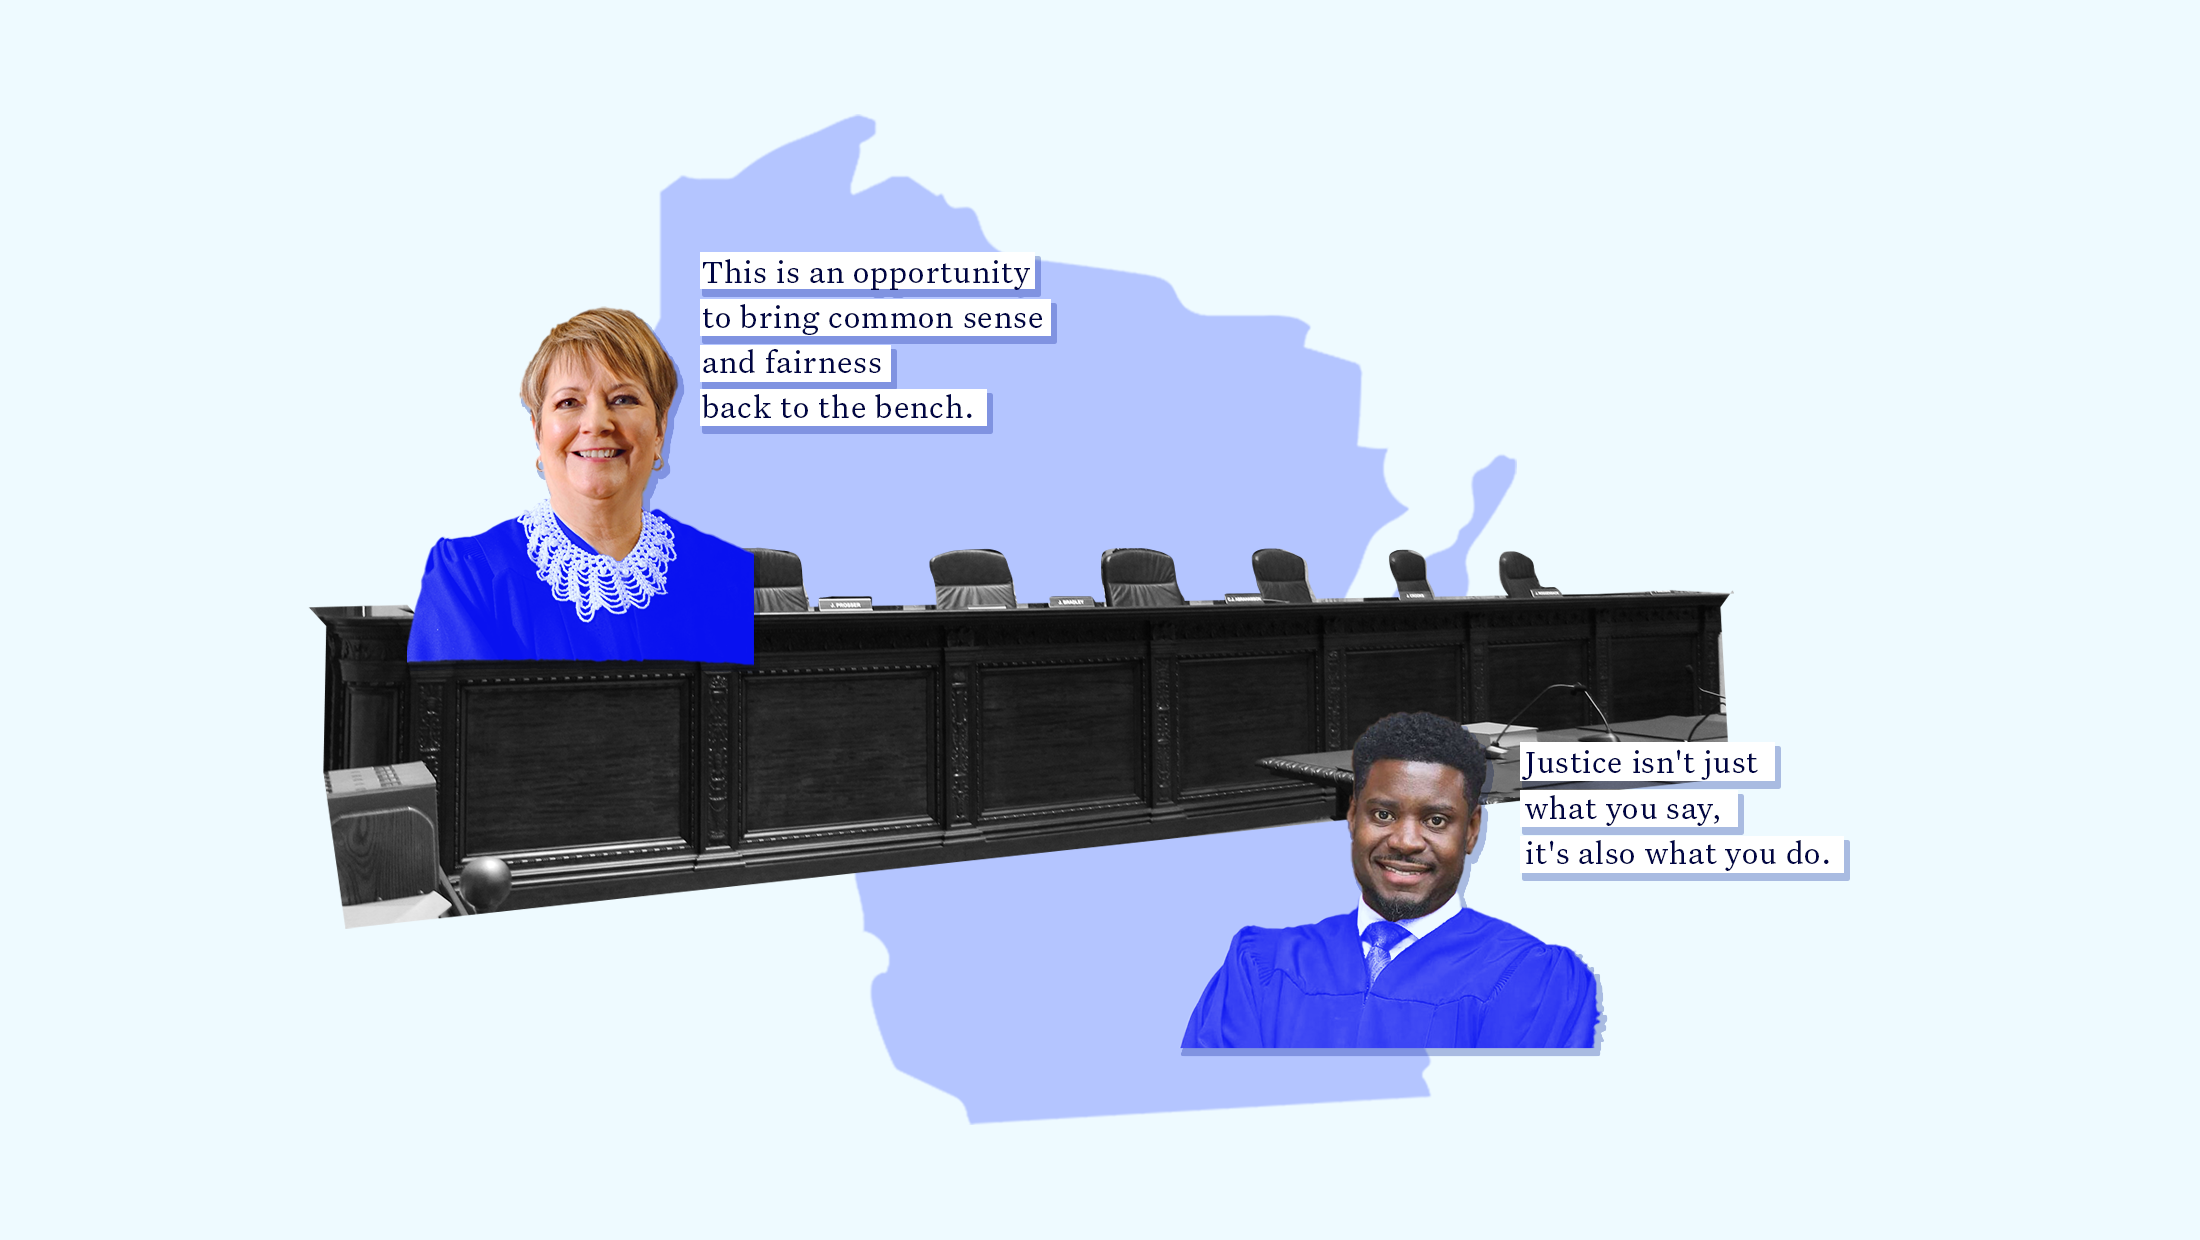 A blue toned outlined of the state of Wisconsin with a black and white image of the Wisconsin Supreme Court bench in front of it. On one side is an image of Judge Janet Protasiewicz in a blue-toned robe with a quote that reads "This is an opportunity to bring commonsense and fairness back to the bench." On the other side is an image of Judge Everett Mitchell in a blue-toned robe with a quote that reads "Justice isn't just what you say, it's also what you do.”